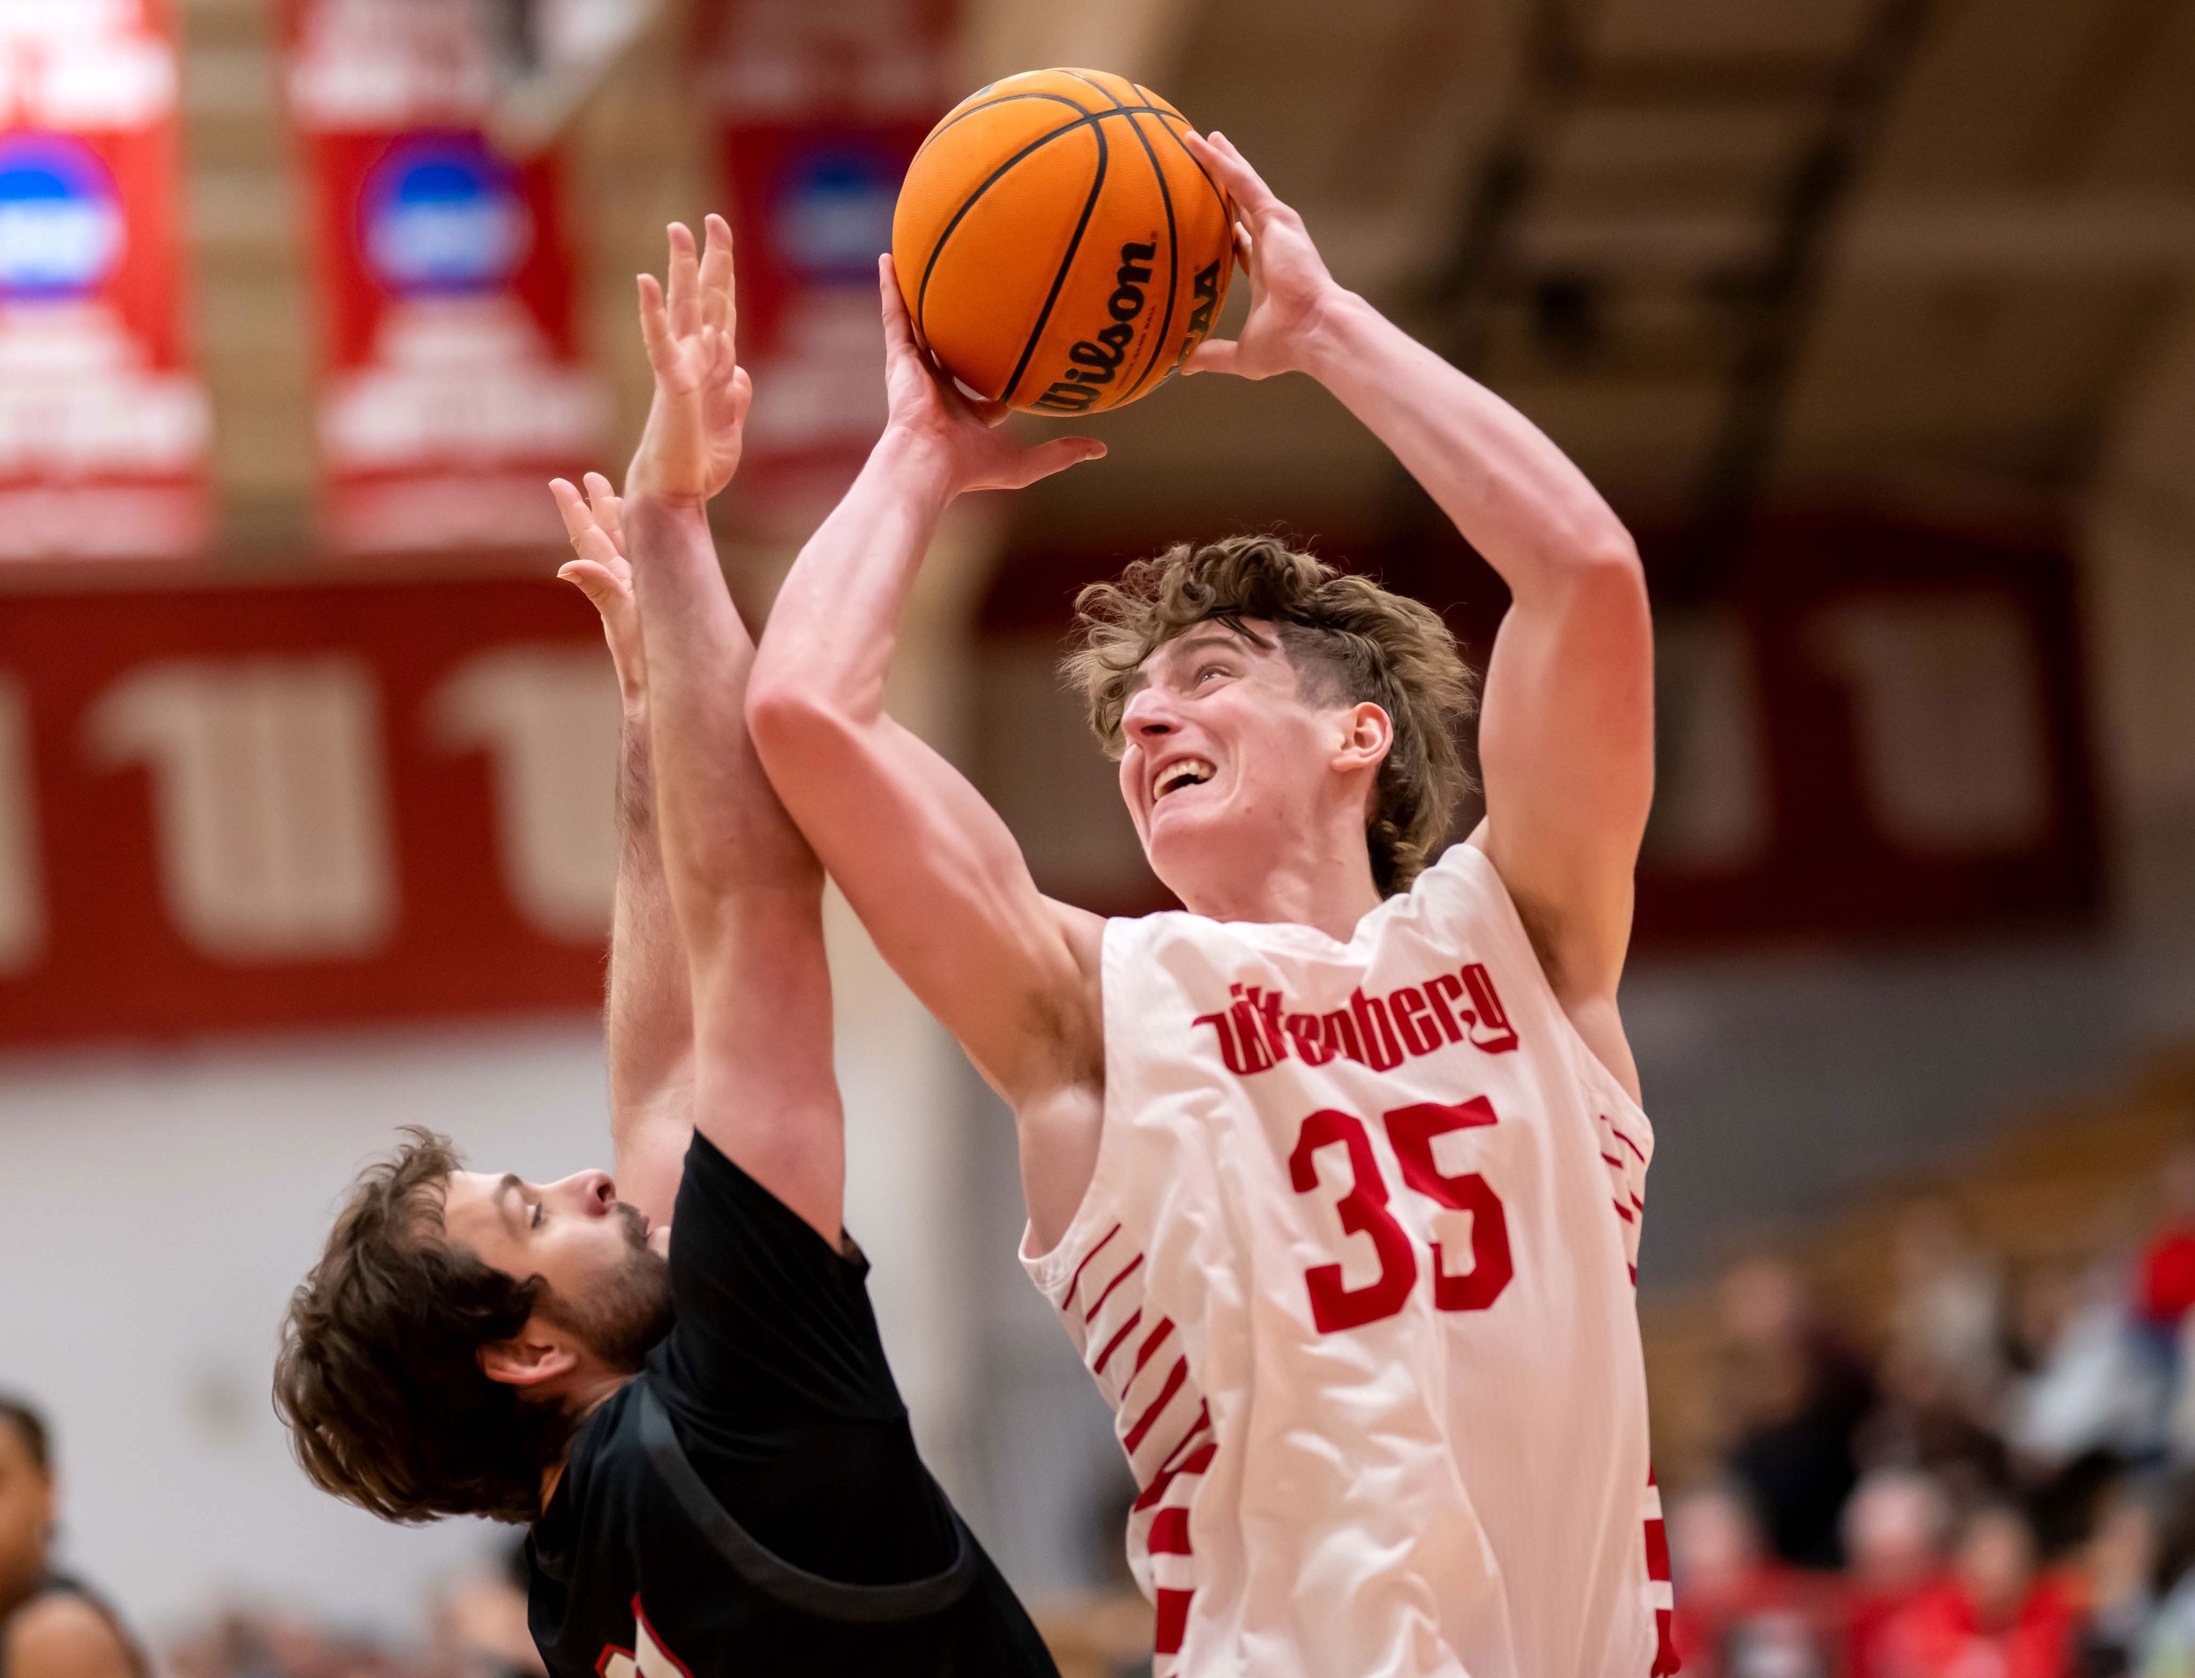 Sophomore Dawson Scott hit the game-tying basket with less than a second remaining in regulation of Wittenberg's eventual 77-73 overtime win over DePauw on Wednesday night.